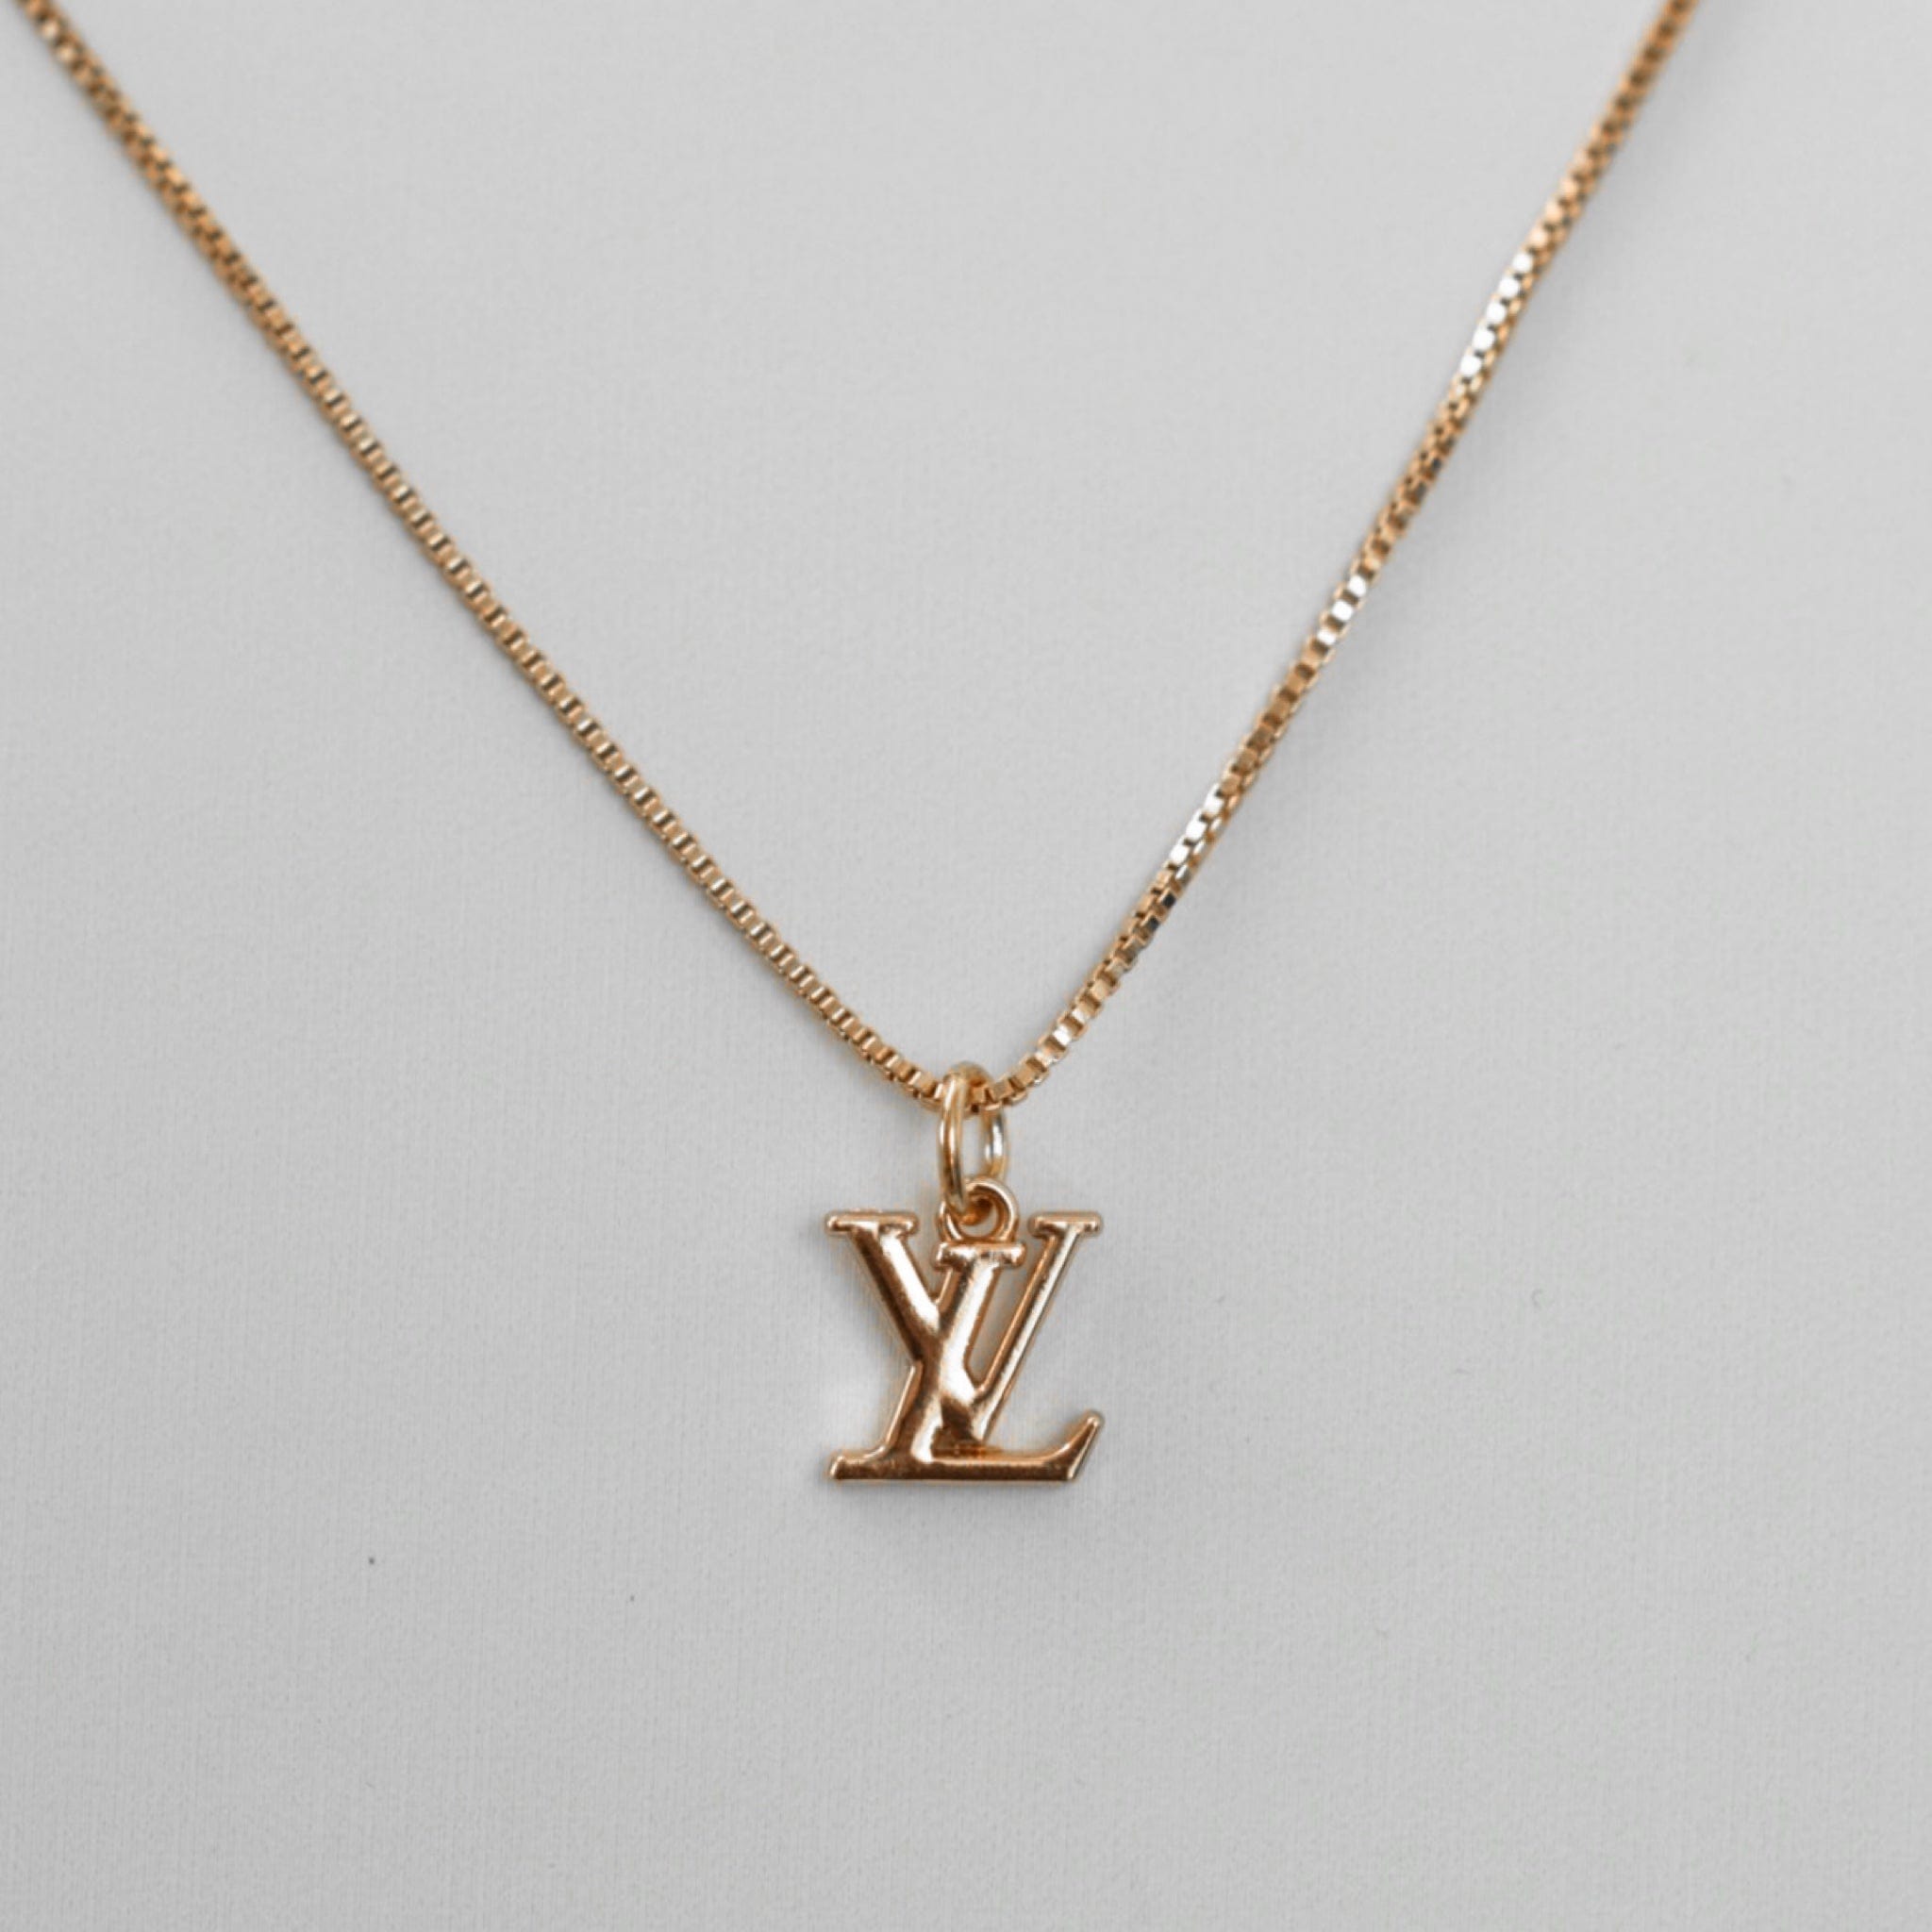 Products by Louis Vuitton: Louisette Necklace - Wishupon